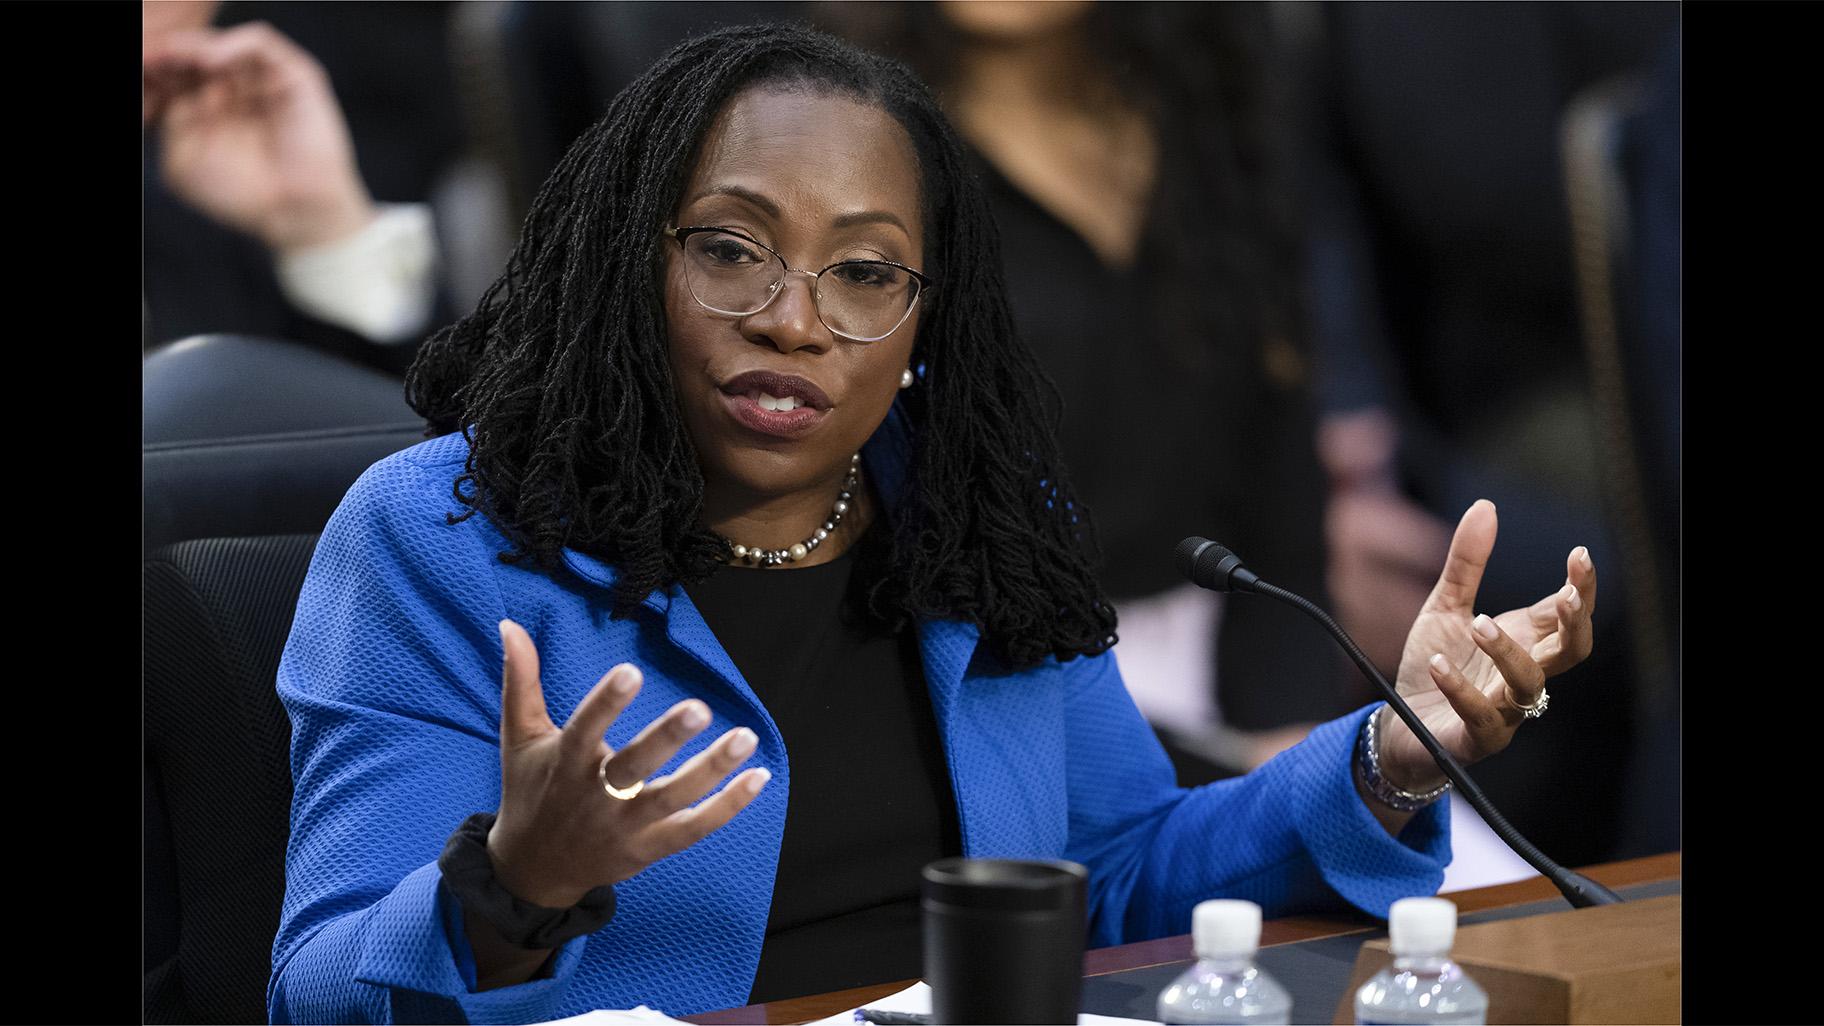 Supreme Court nominee Ketanji Brown Jackson testifies during her Senate Judiciary Committee confirmation hearing on Capitol Hill in Washington, Wednesday, March 23, 2022. (AP Photo / Alex Brandon)